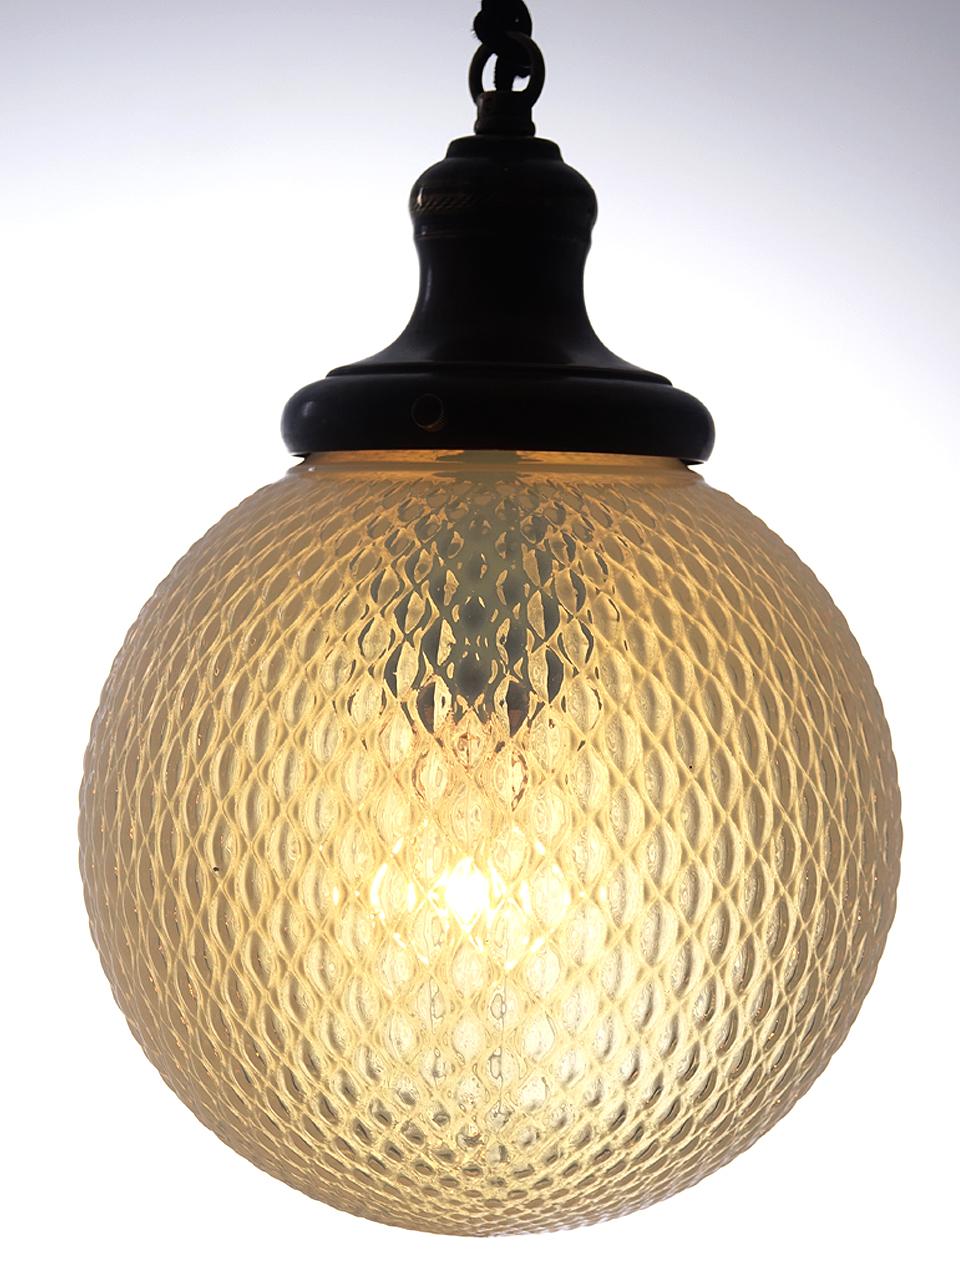 This glass is part vaseline and part opeline. The color and quilt pattern give this pendant a unique look. The shade holder has a period Japanned finish.